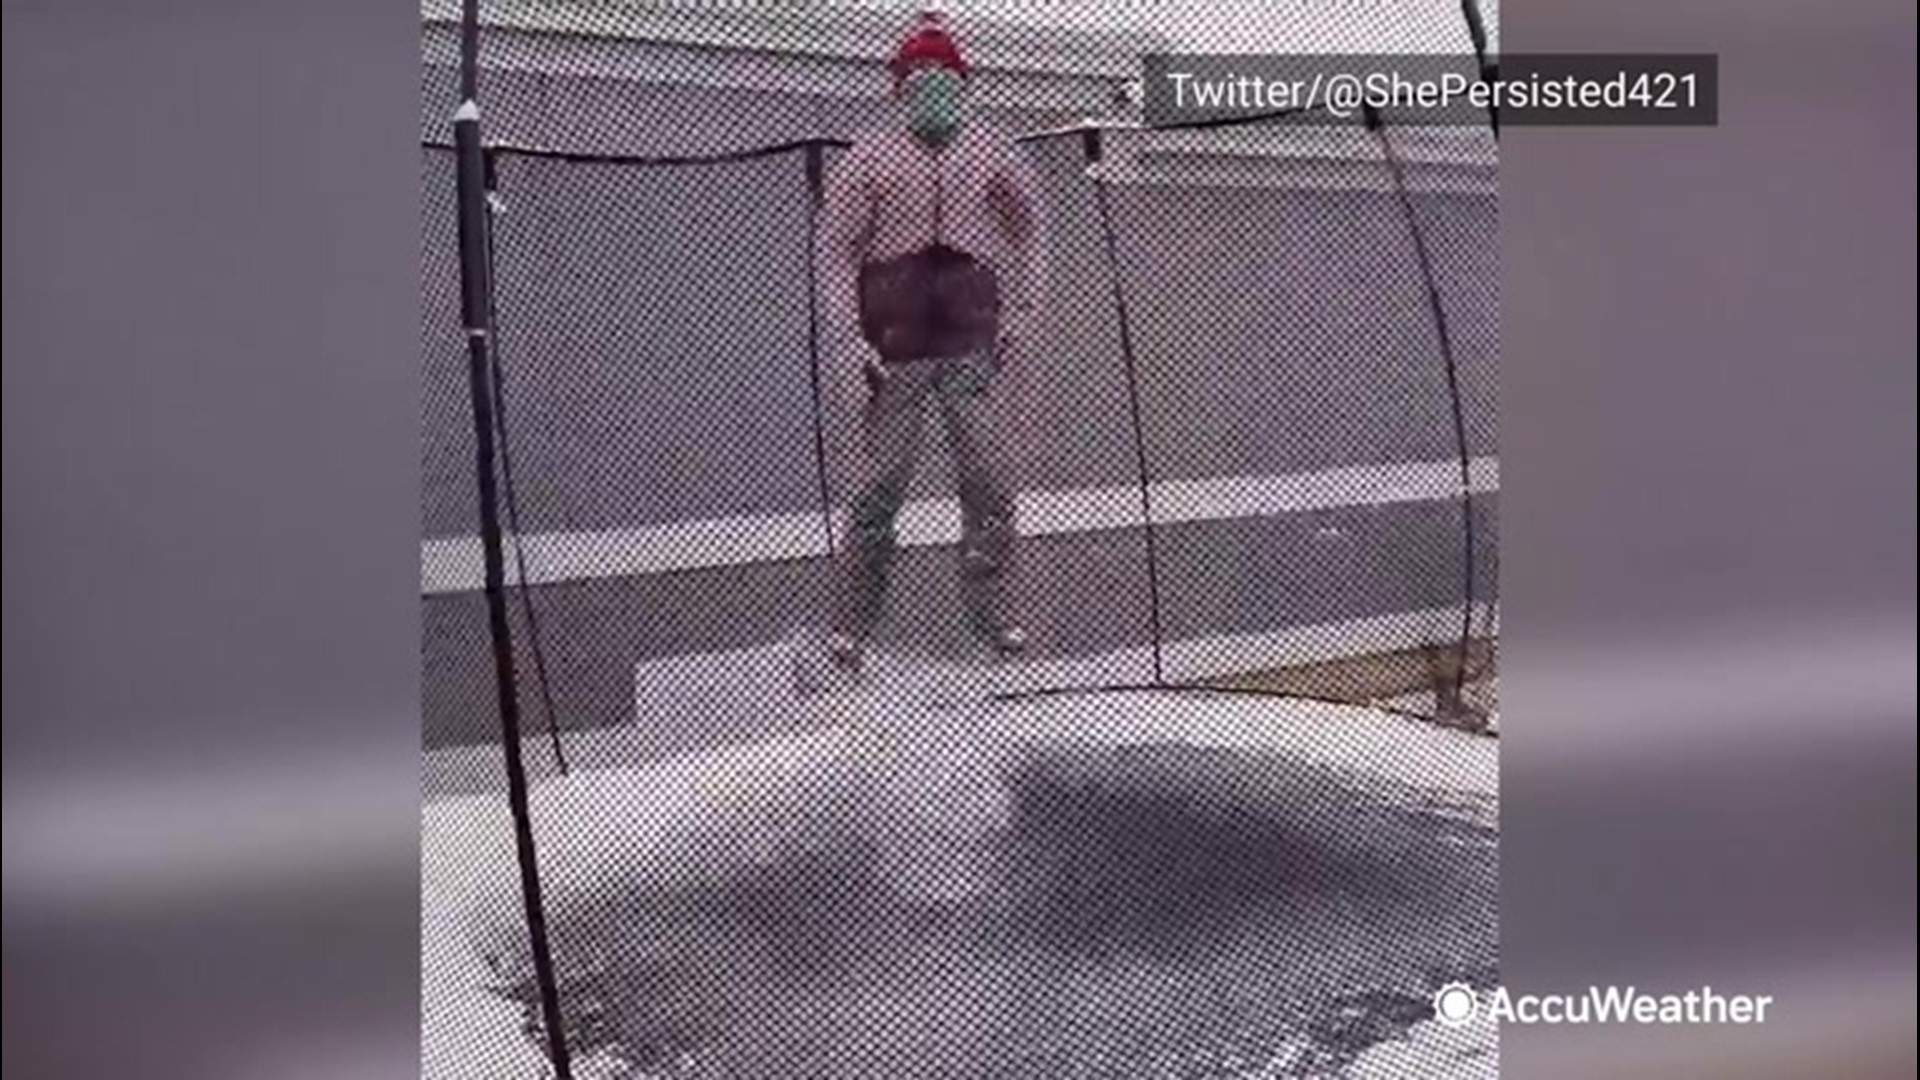 A mother filmed her daughter doing backflips on their trampoline at their home in Denver, Colorado, after it snowed on Oct. 25.